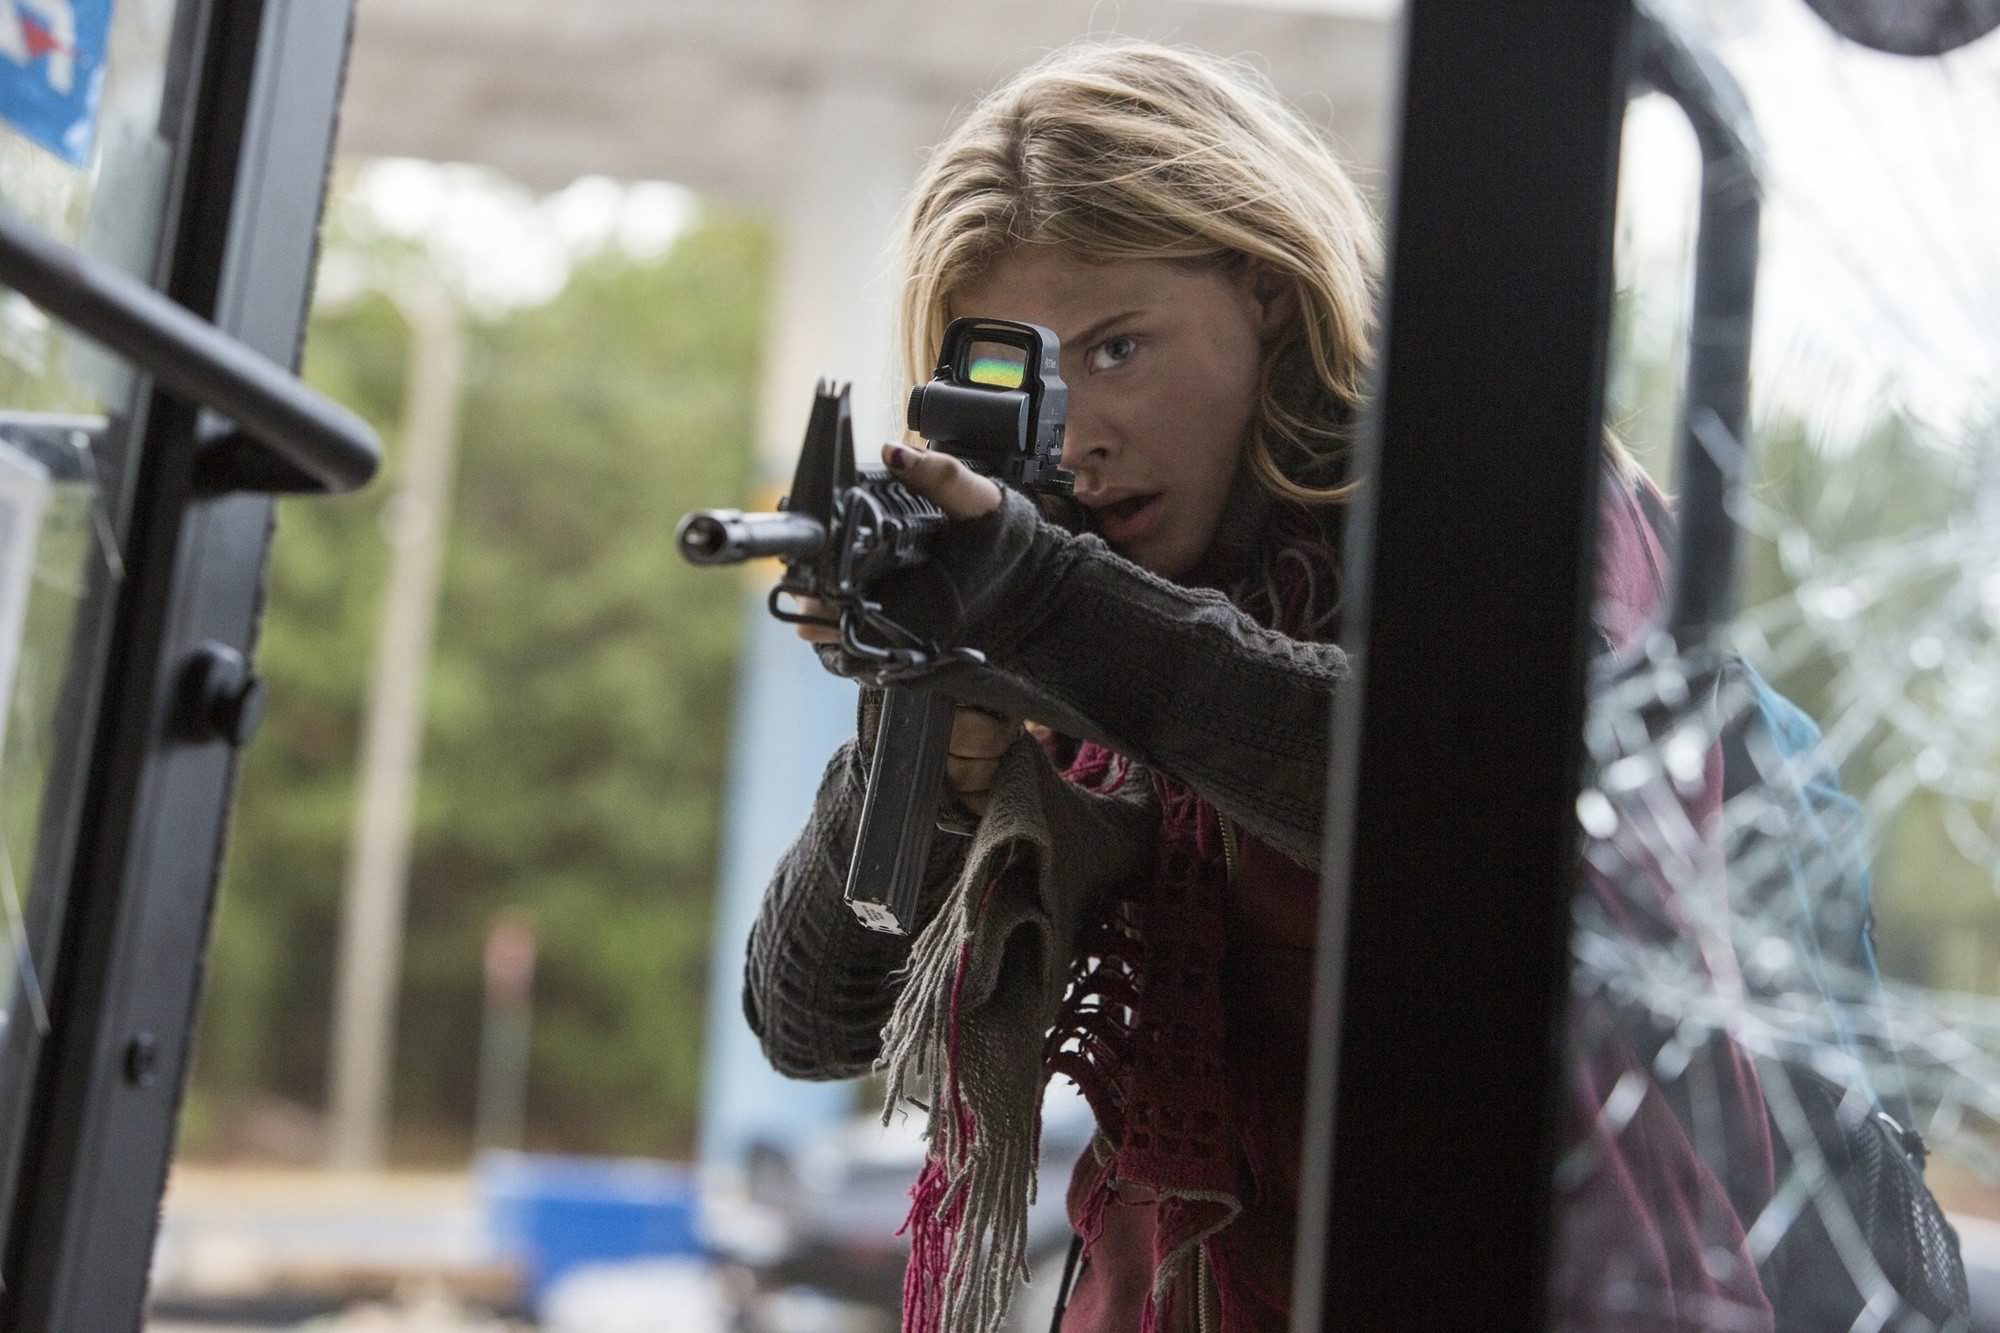 ‘The 5th Wave’ review: Not worth the repetition